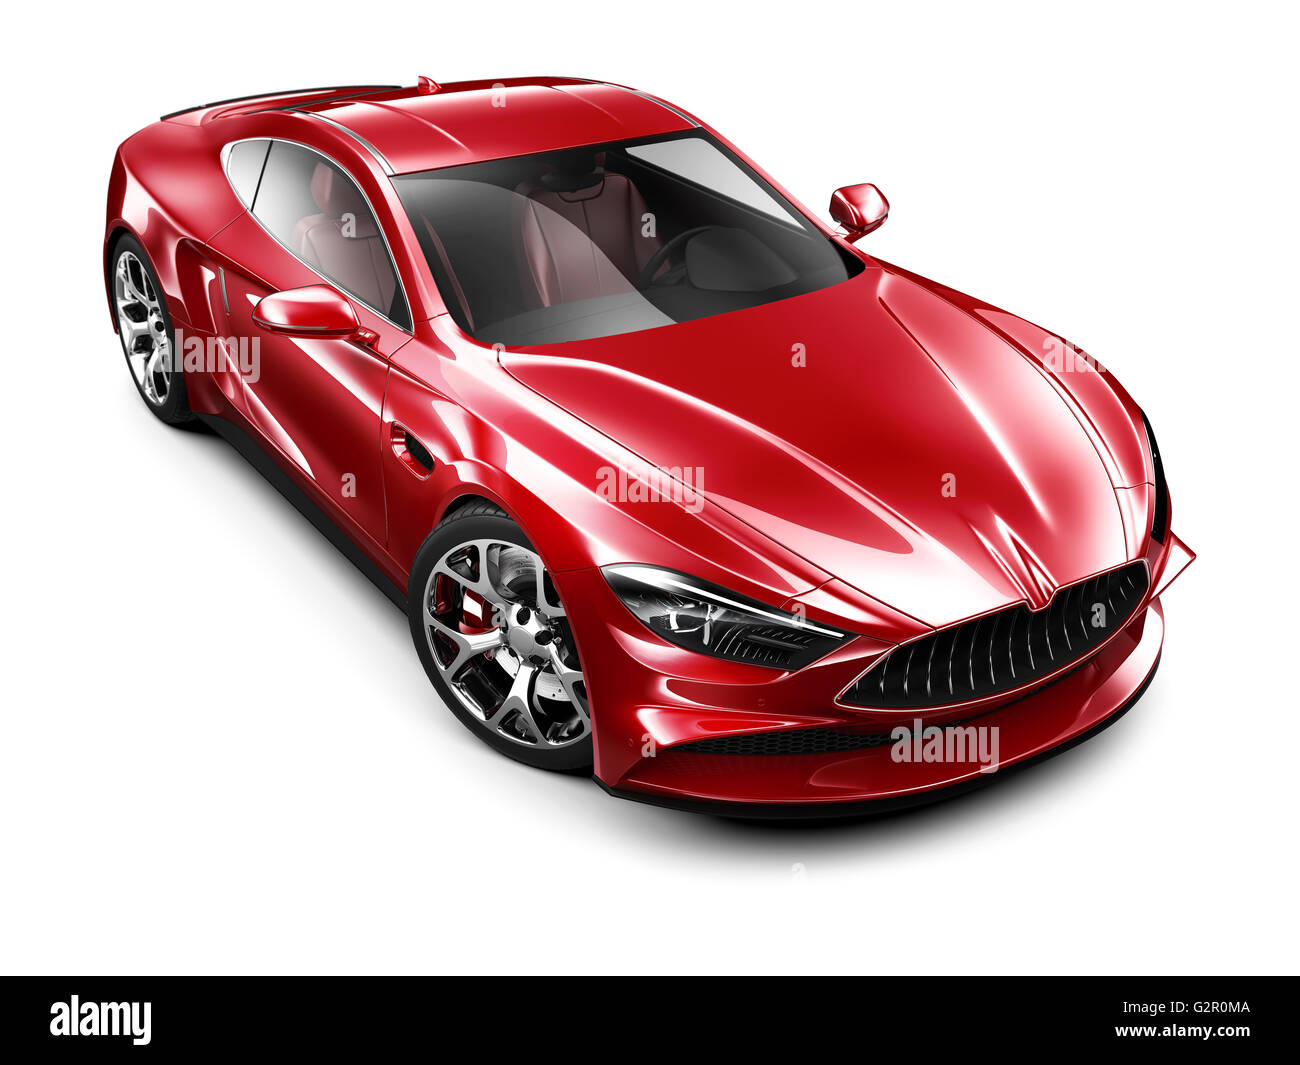 Generic red sports car Stock Photo